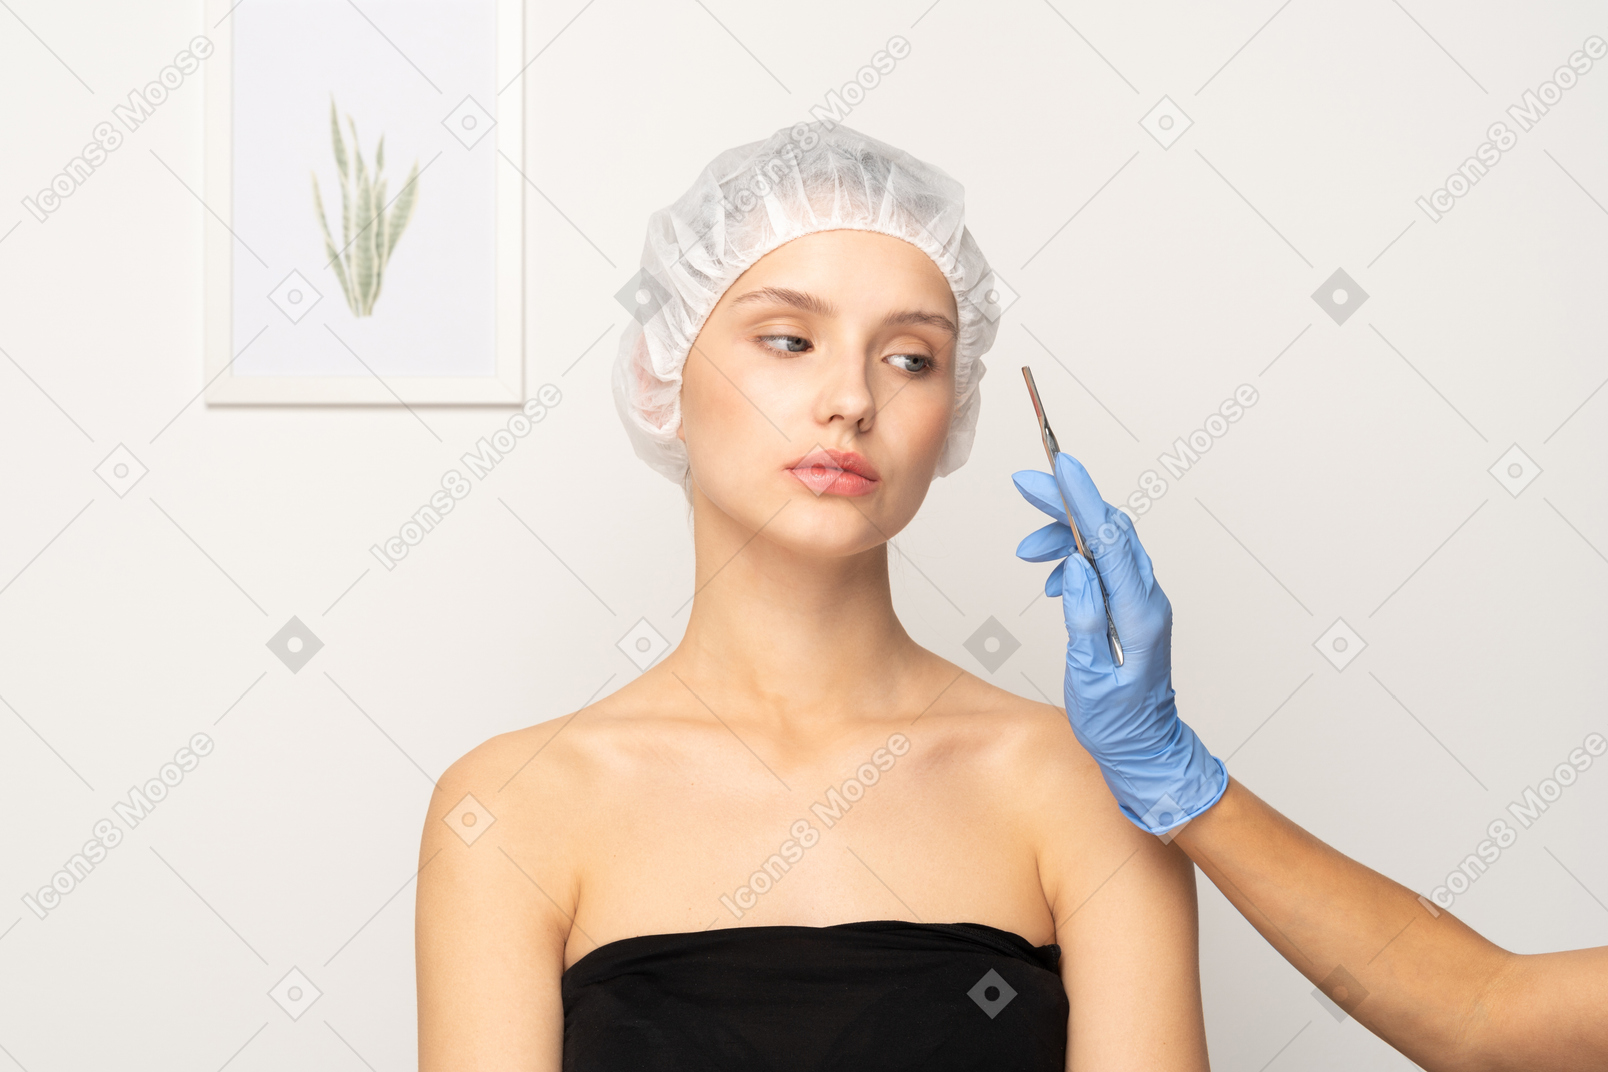 Young attractive woman and surgeon's hand with scalpel